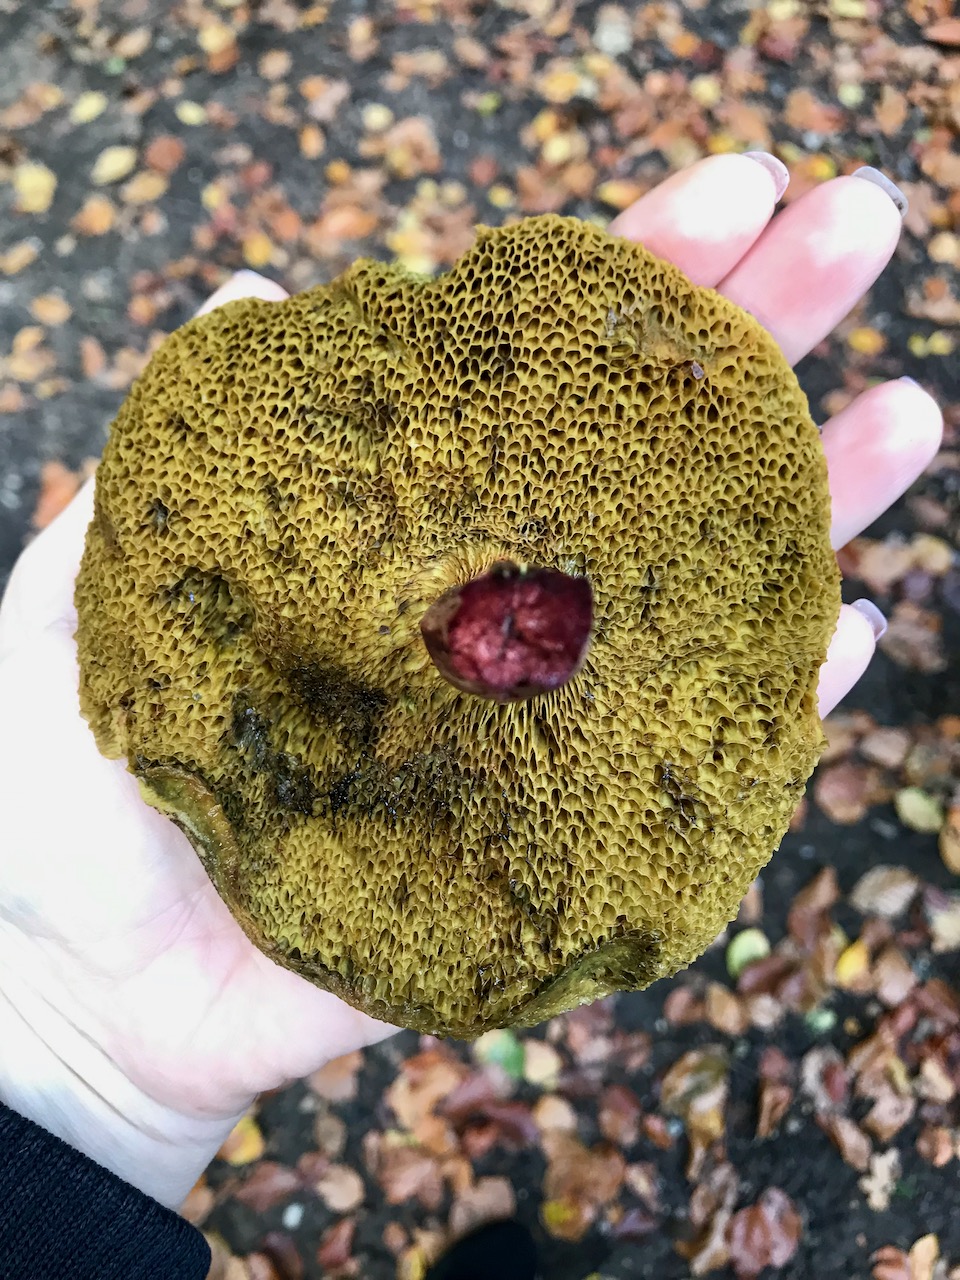 My hand holding a bolete, flipped upside down. The stem is red and the underside of the mushroom cap is very porous.